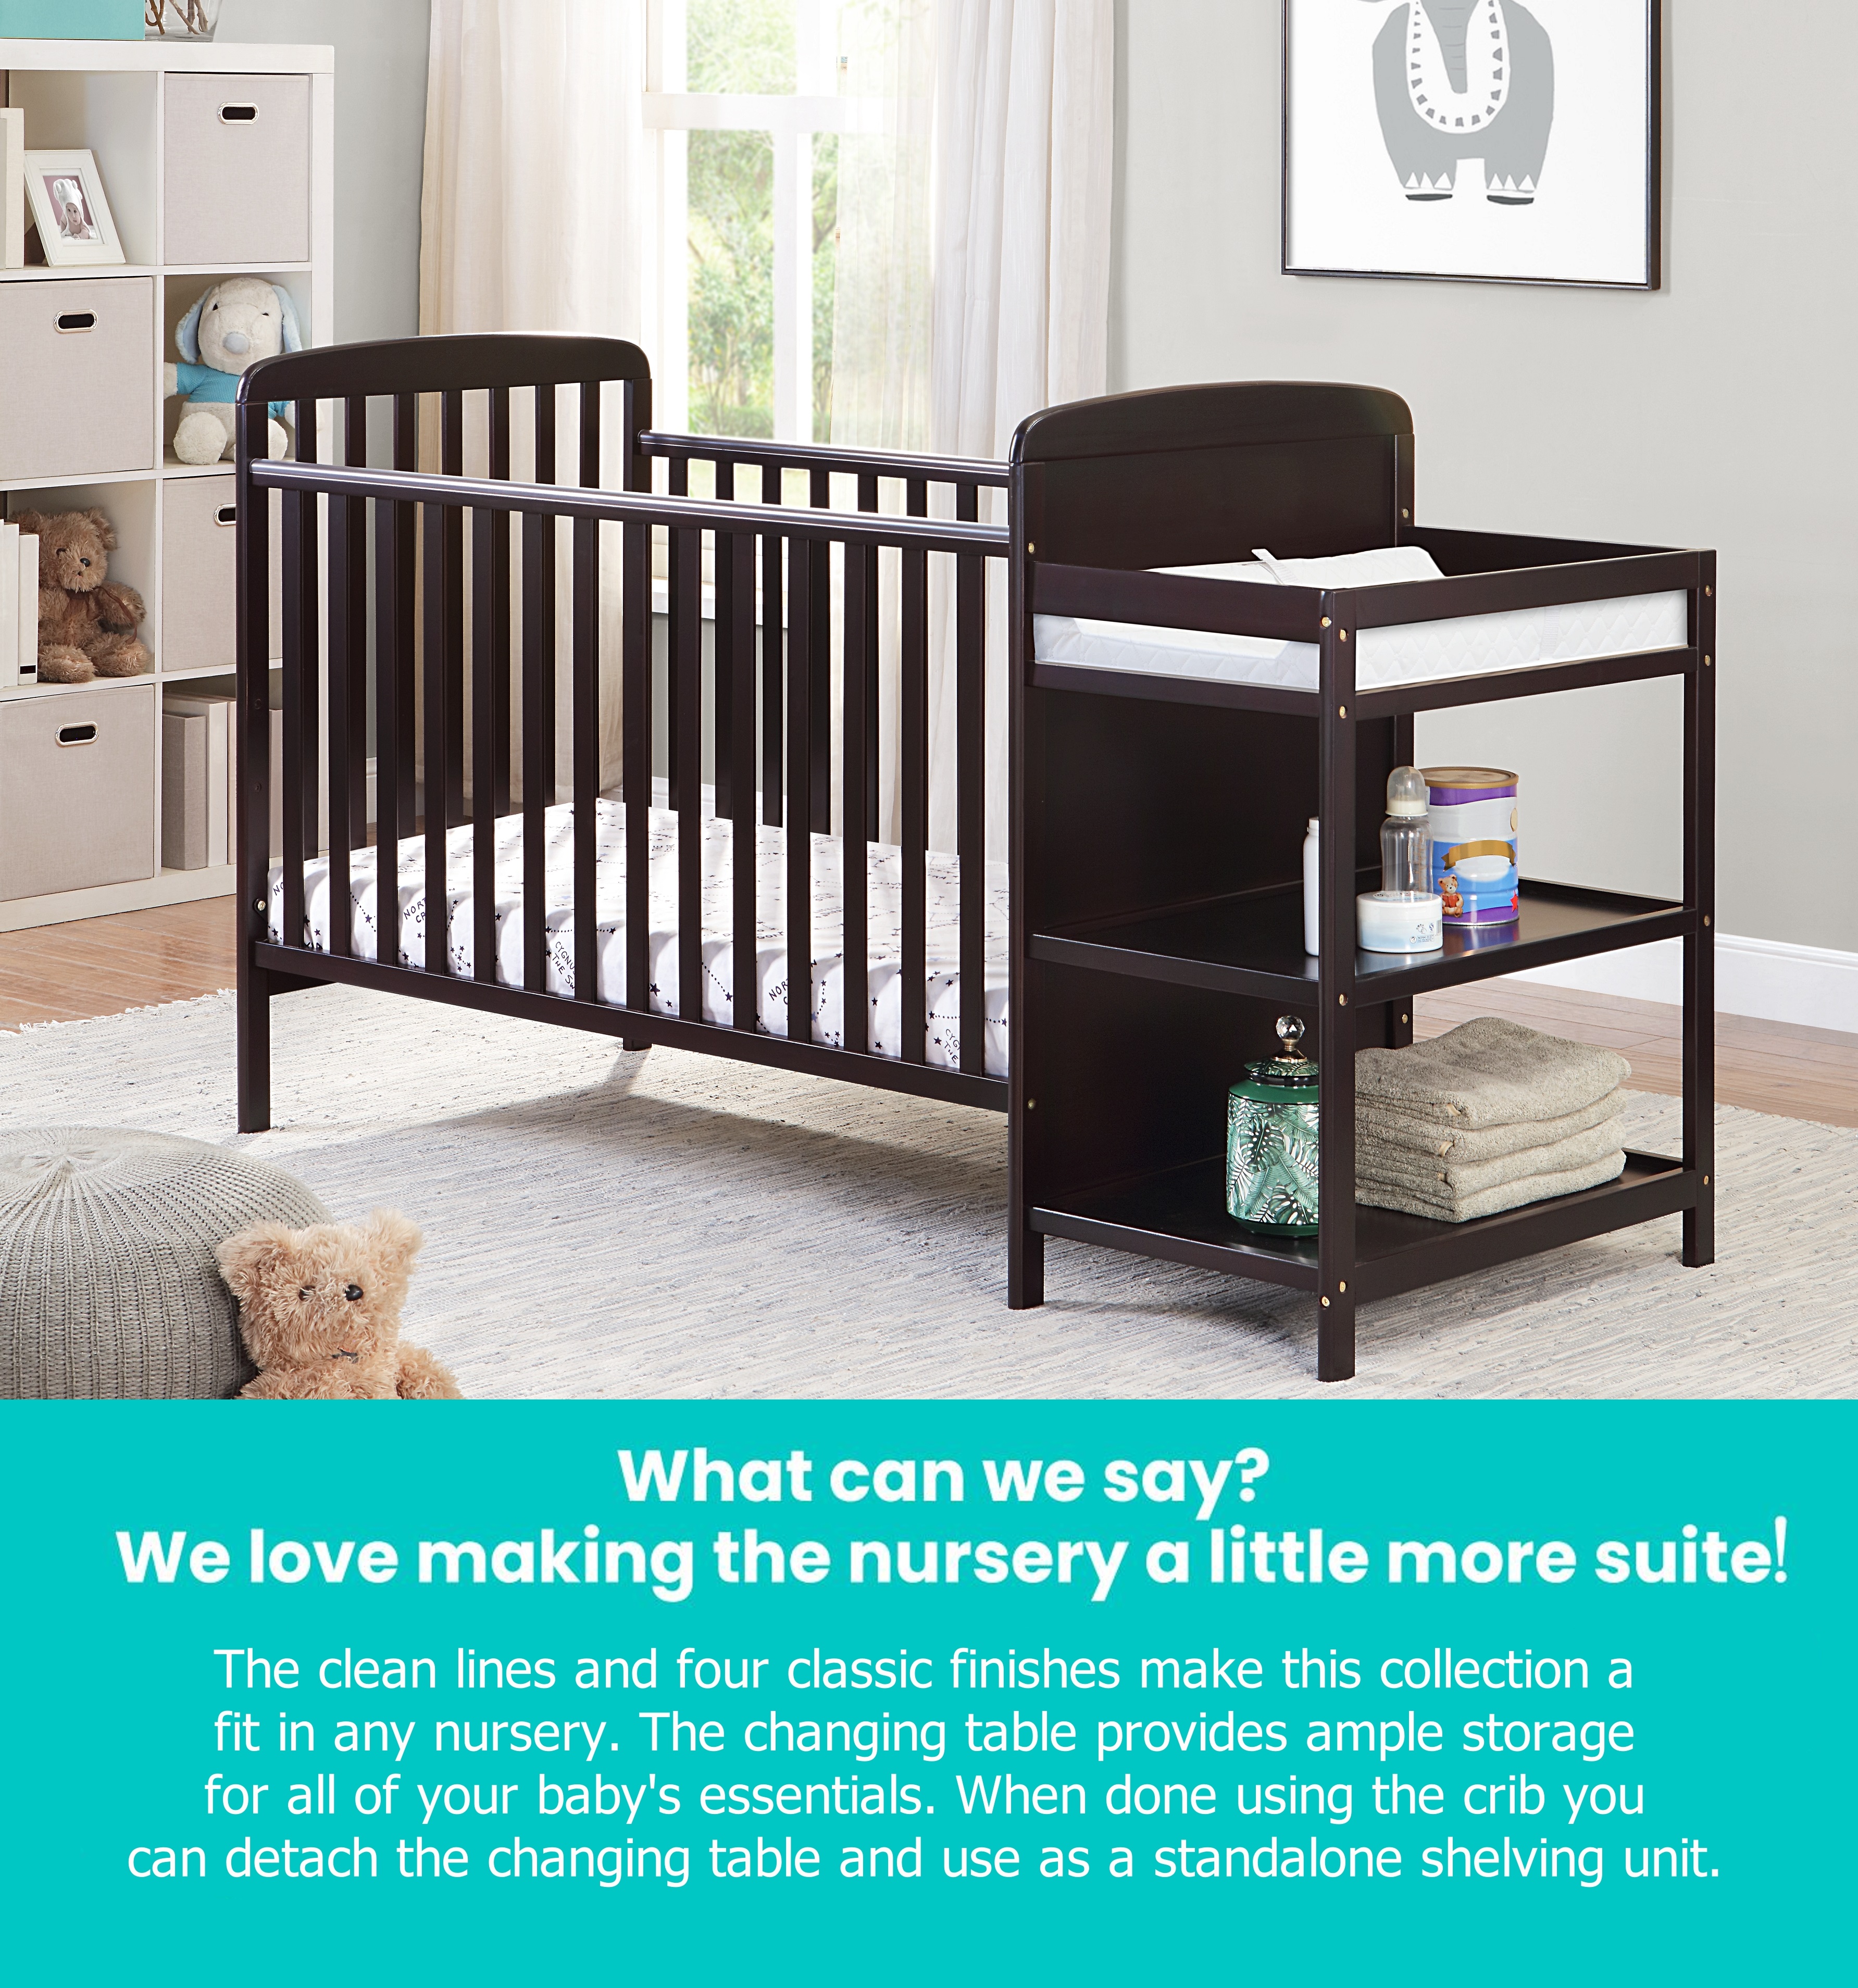 Suite Bebe Ramsey Crib and Changer Combo & Guardrail Bundled Espresso - image 4 of 10